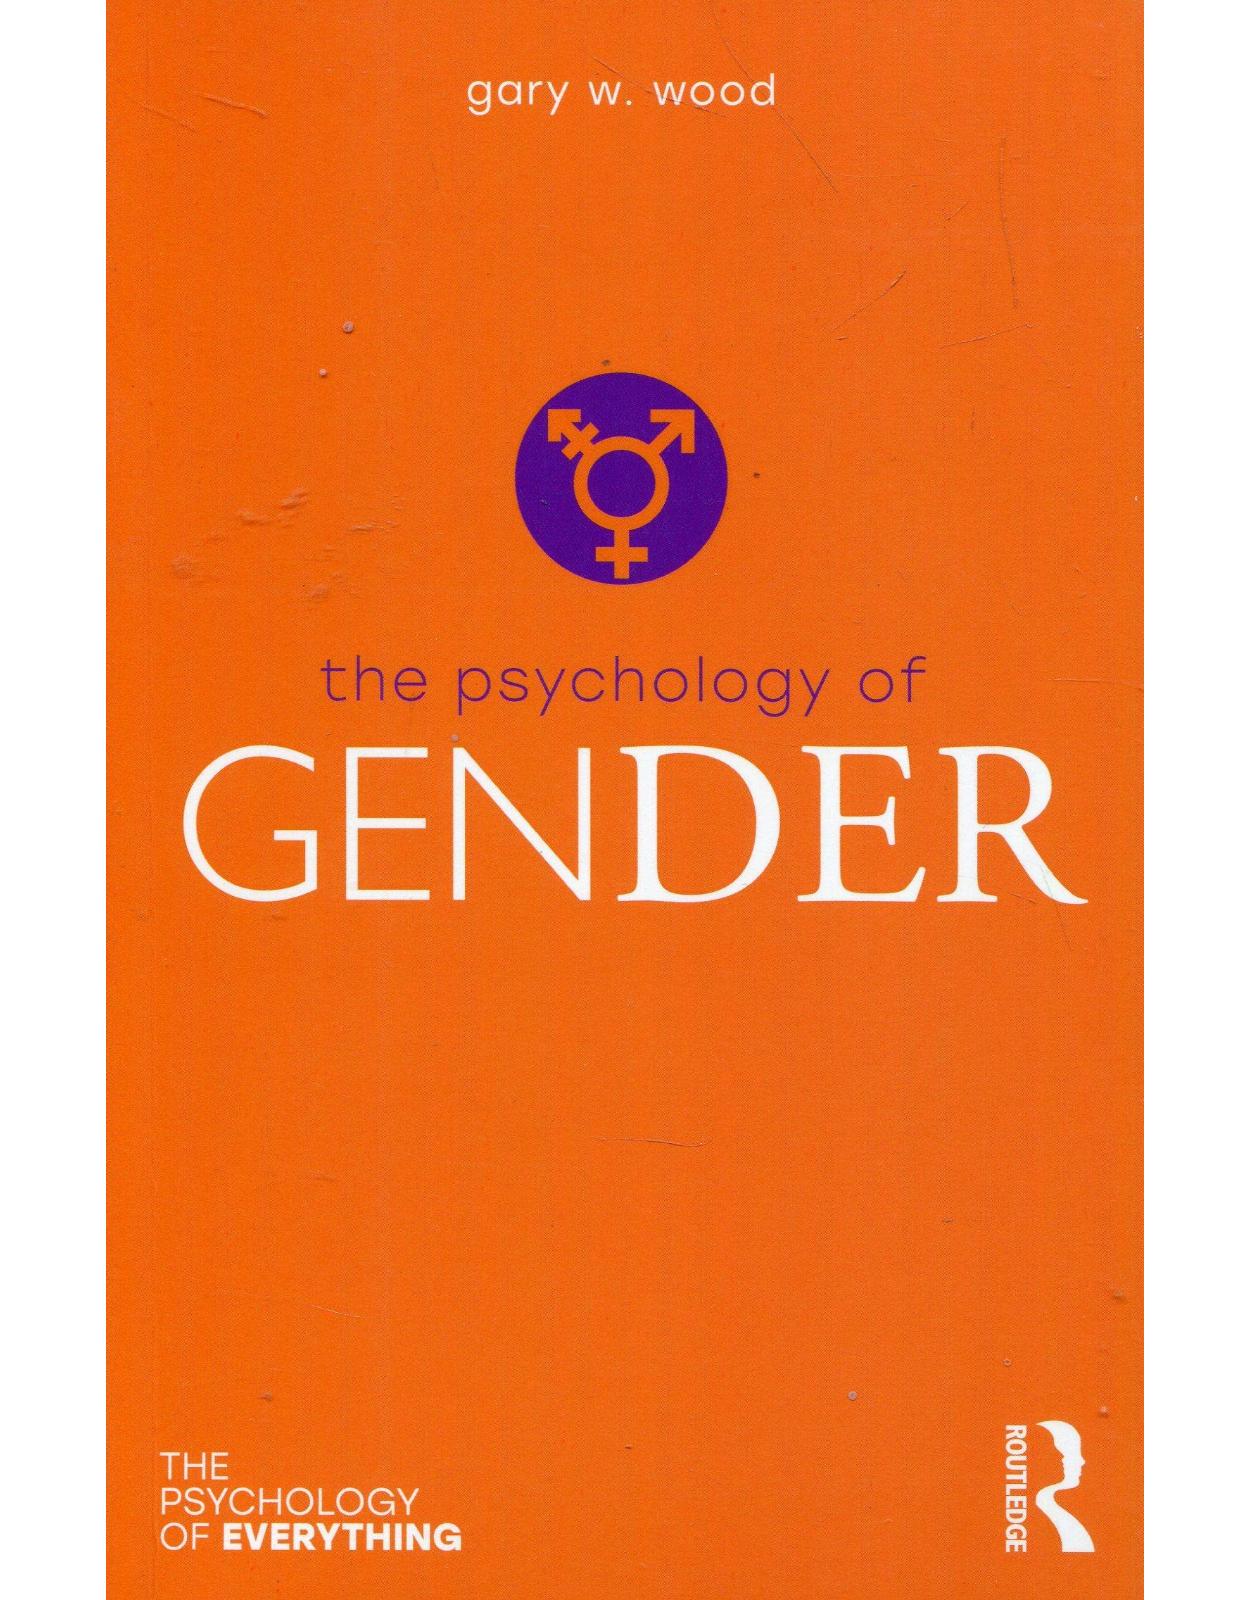 The Psychology of Gender (The Psychology of Everything) 